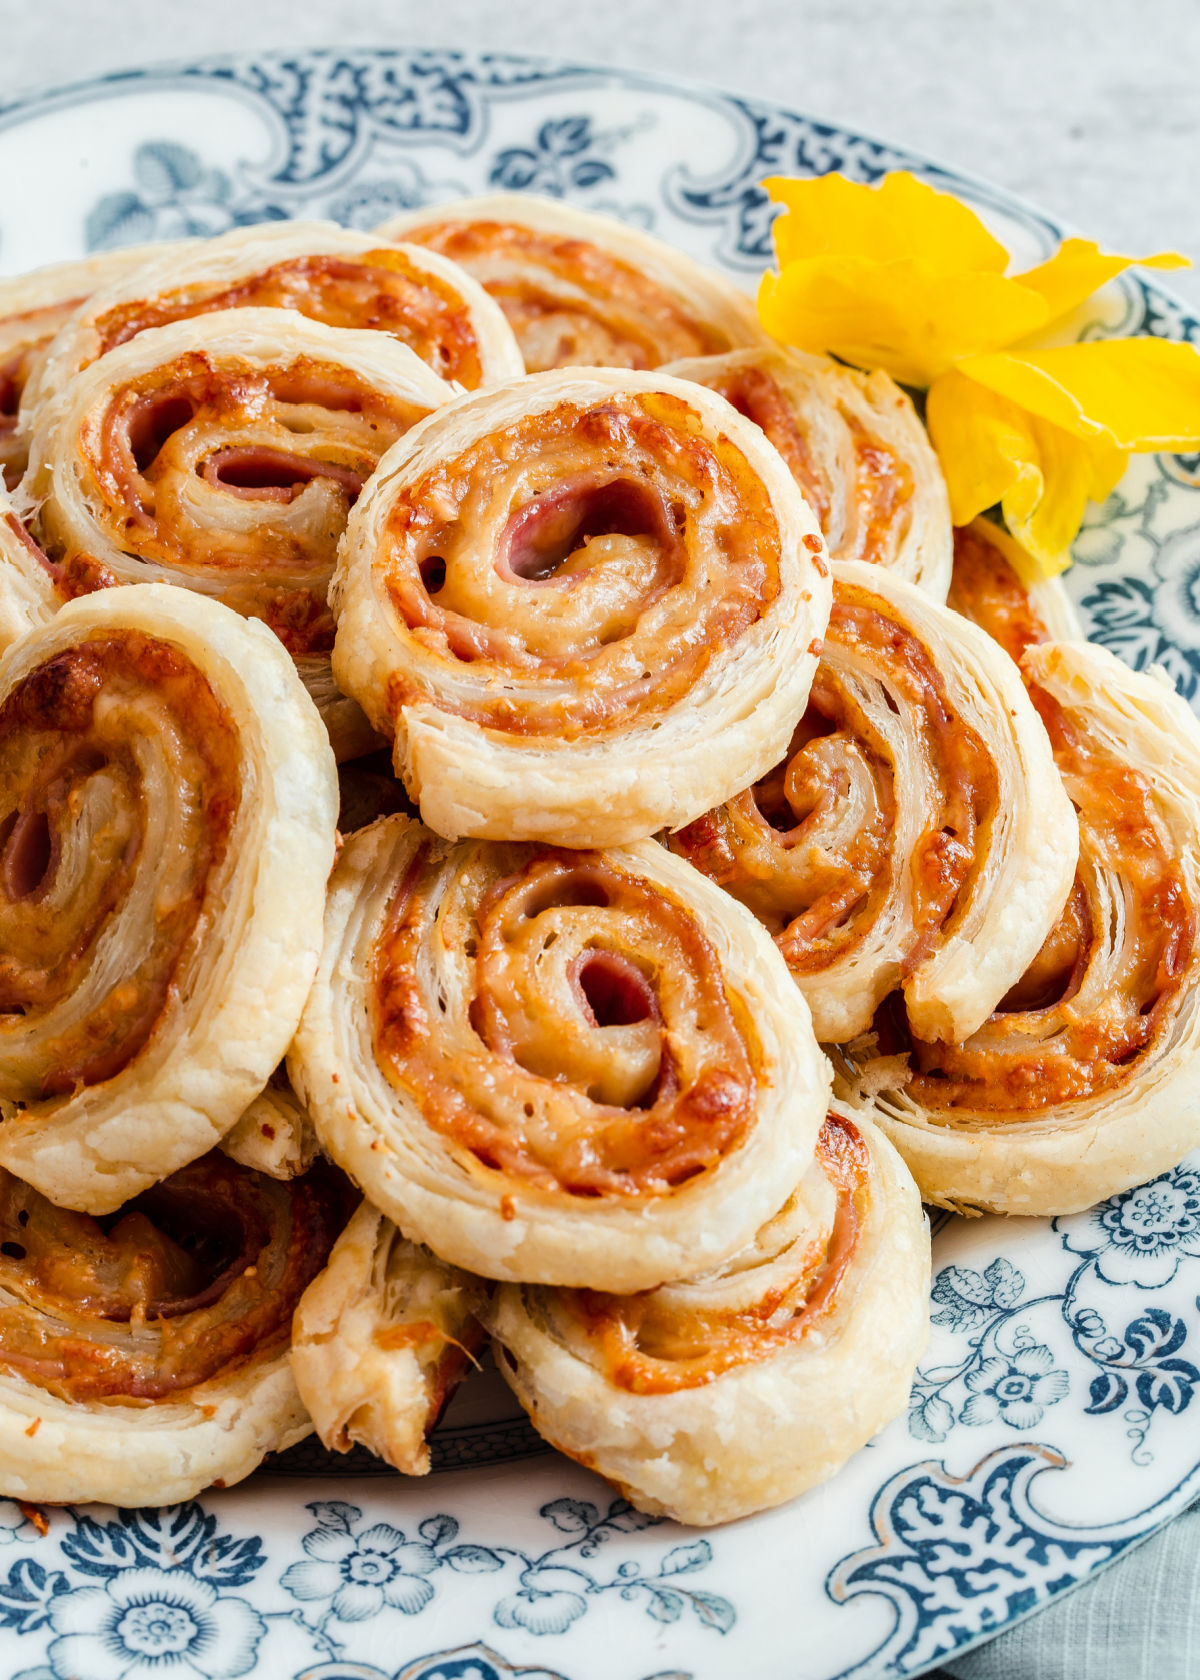 ham and cheese puff pastry pinwheel appetizers piled onto blue and white plate.